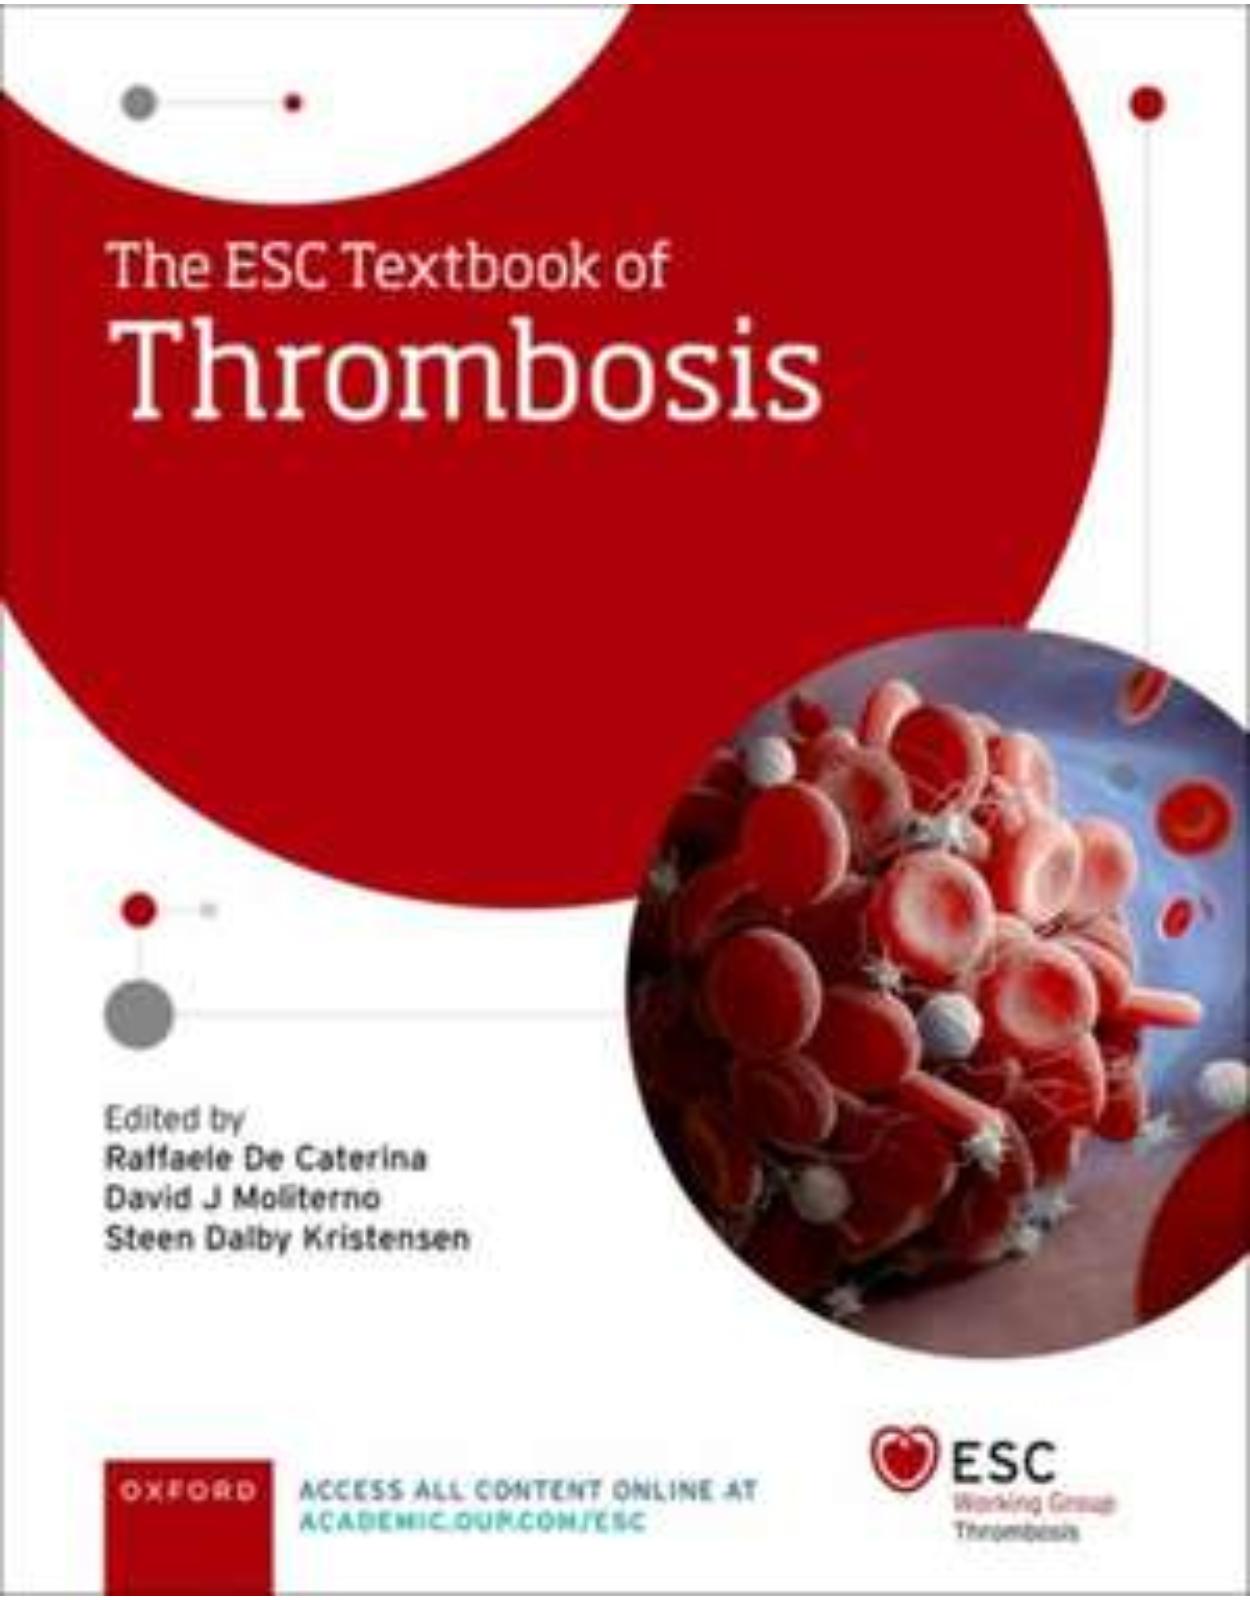 The ESC Textbook of Thrombosis